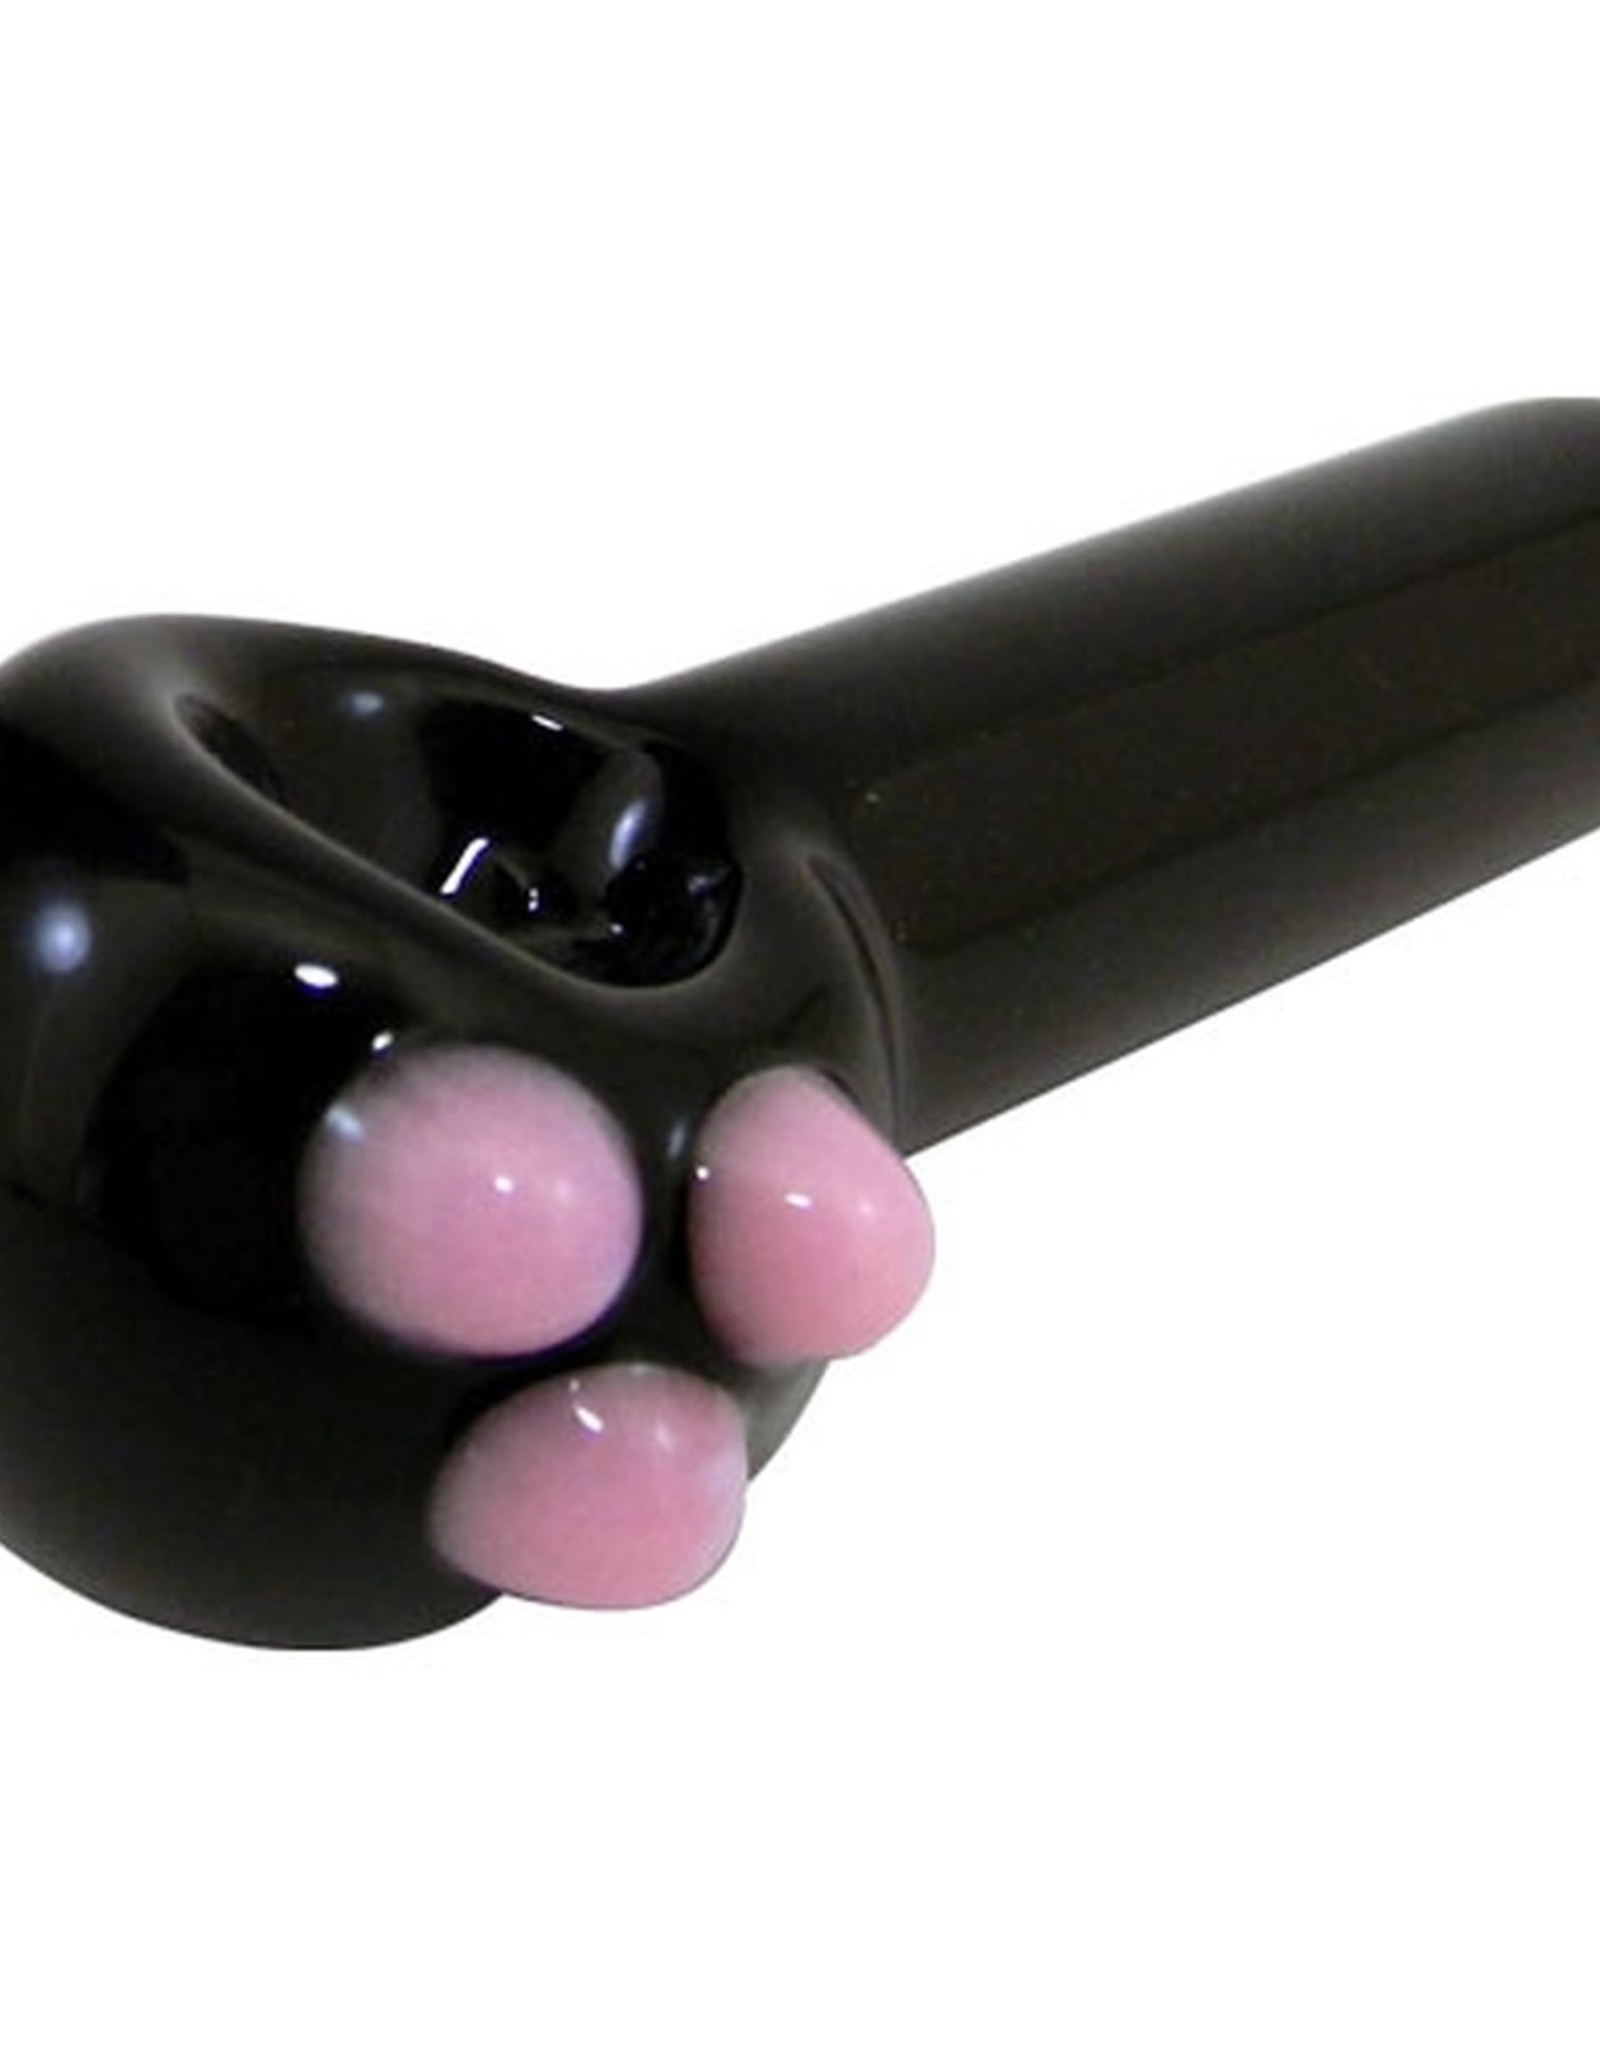 Combo Spoon - Onyx Black by Chameleon Glass